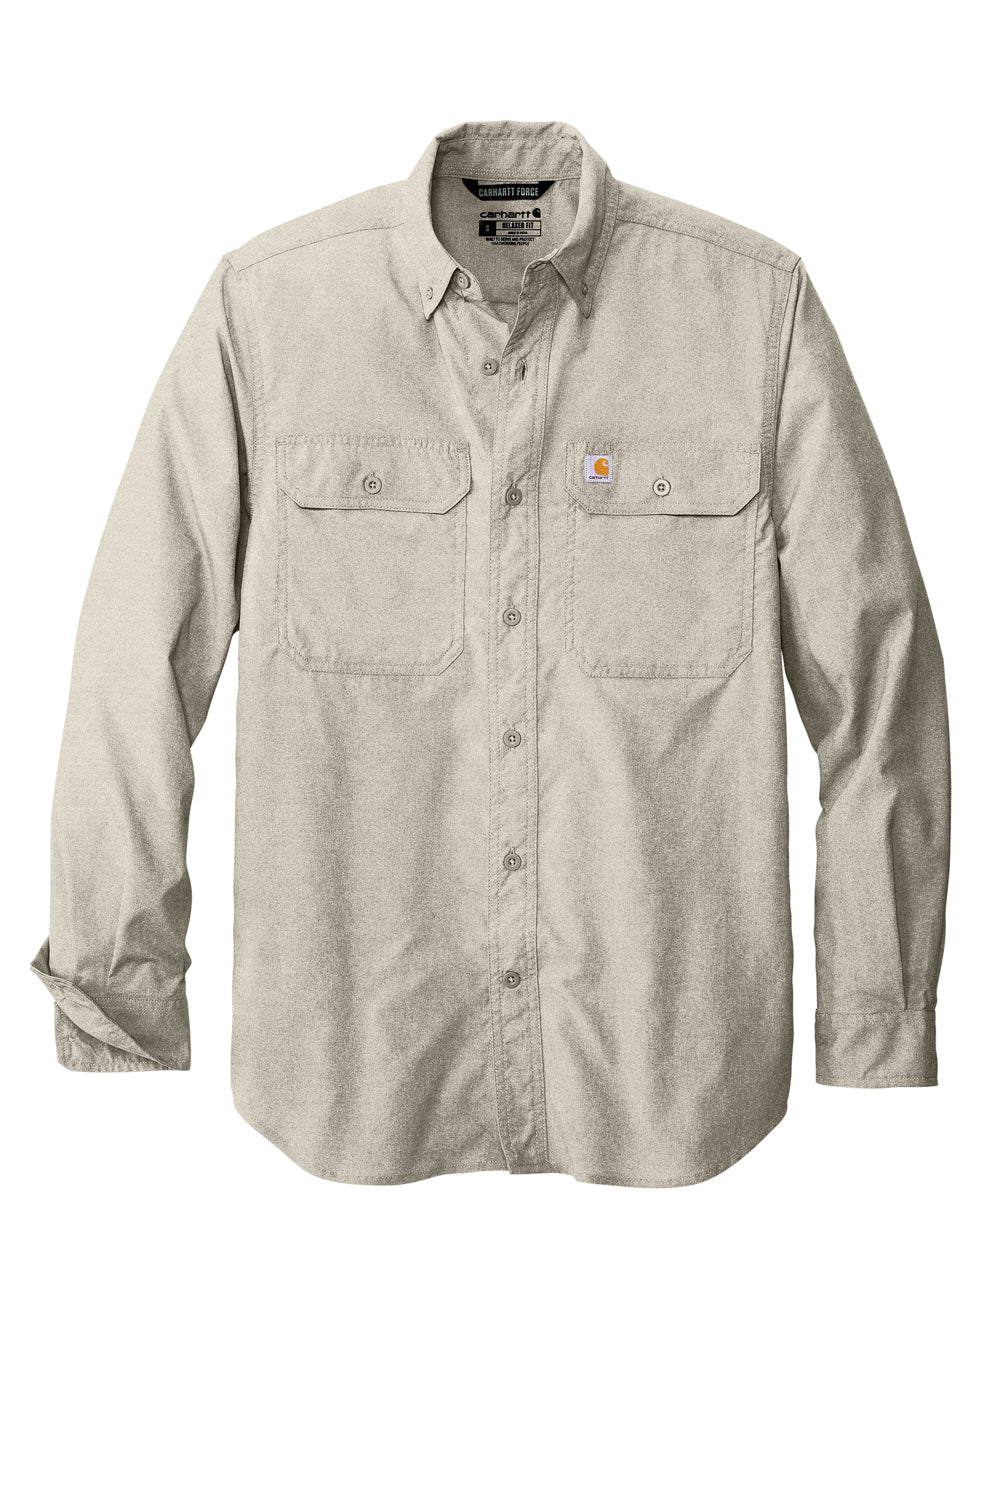 Carhartt CT105291 Mens Force Moisture Wicking Long Sleeve Button Down Shirt w/ Double Pockets Steel Grey Flat Front